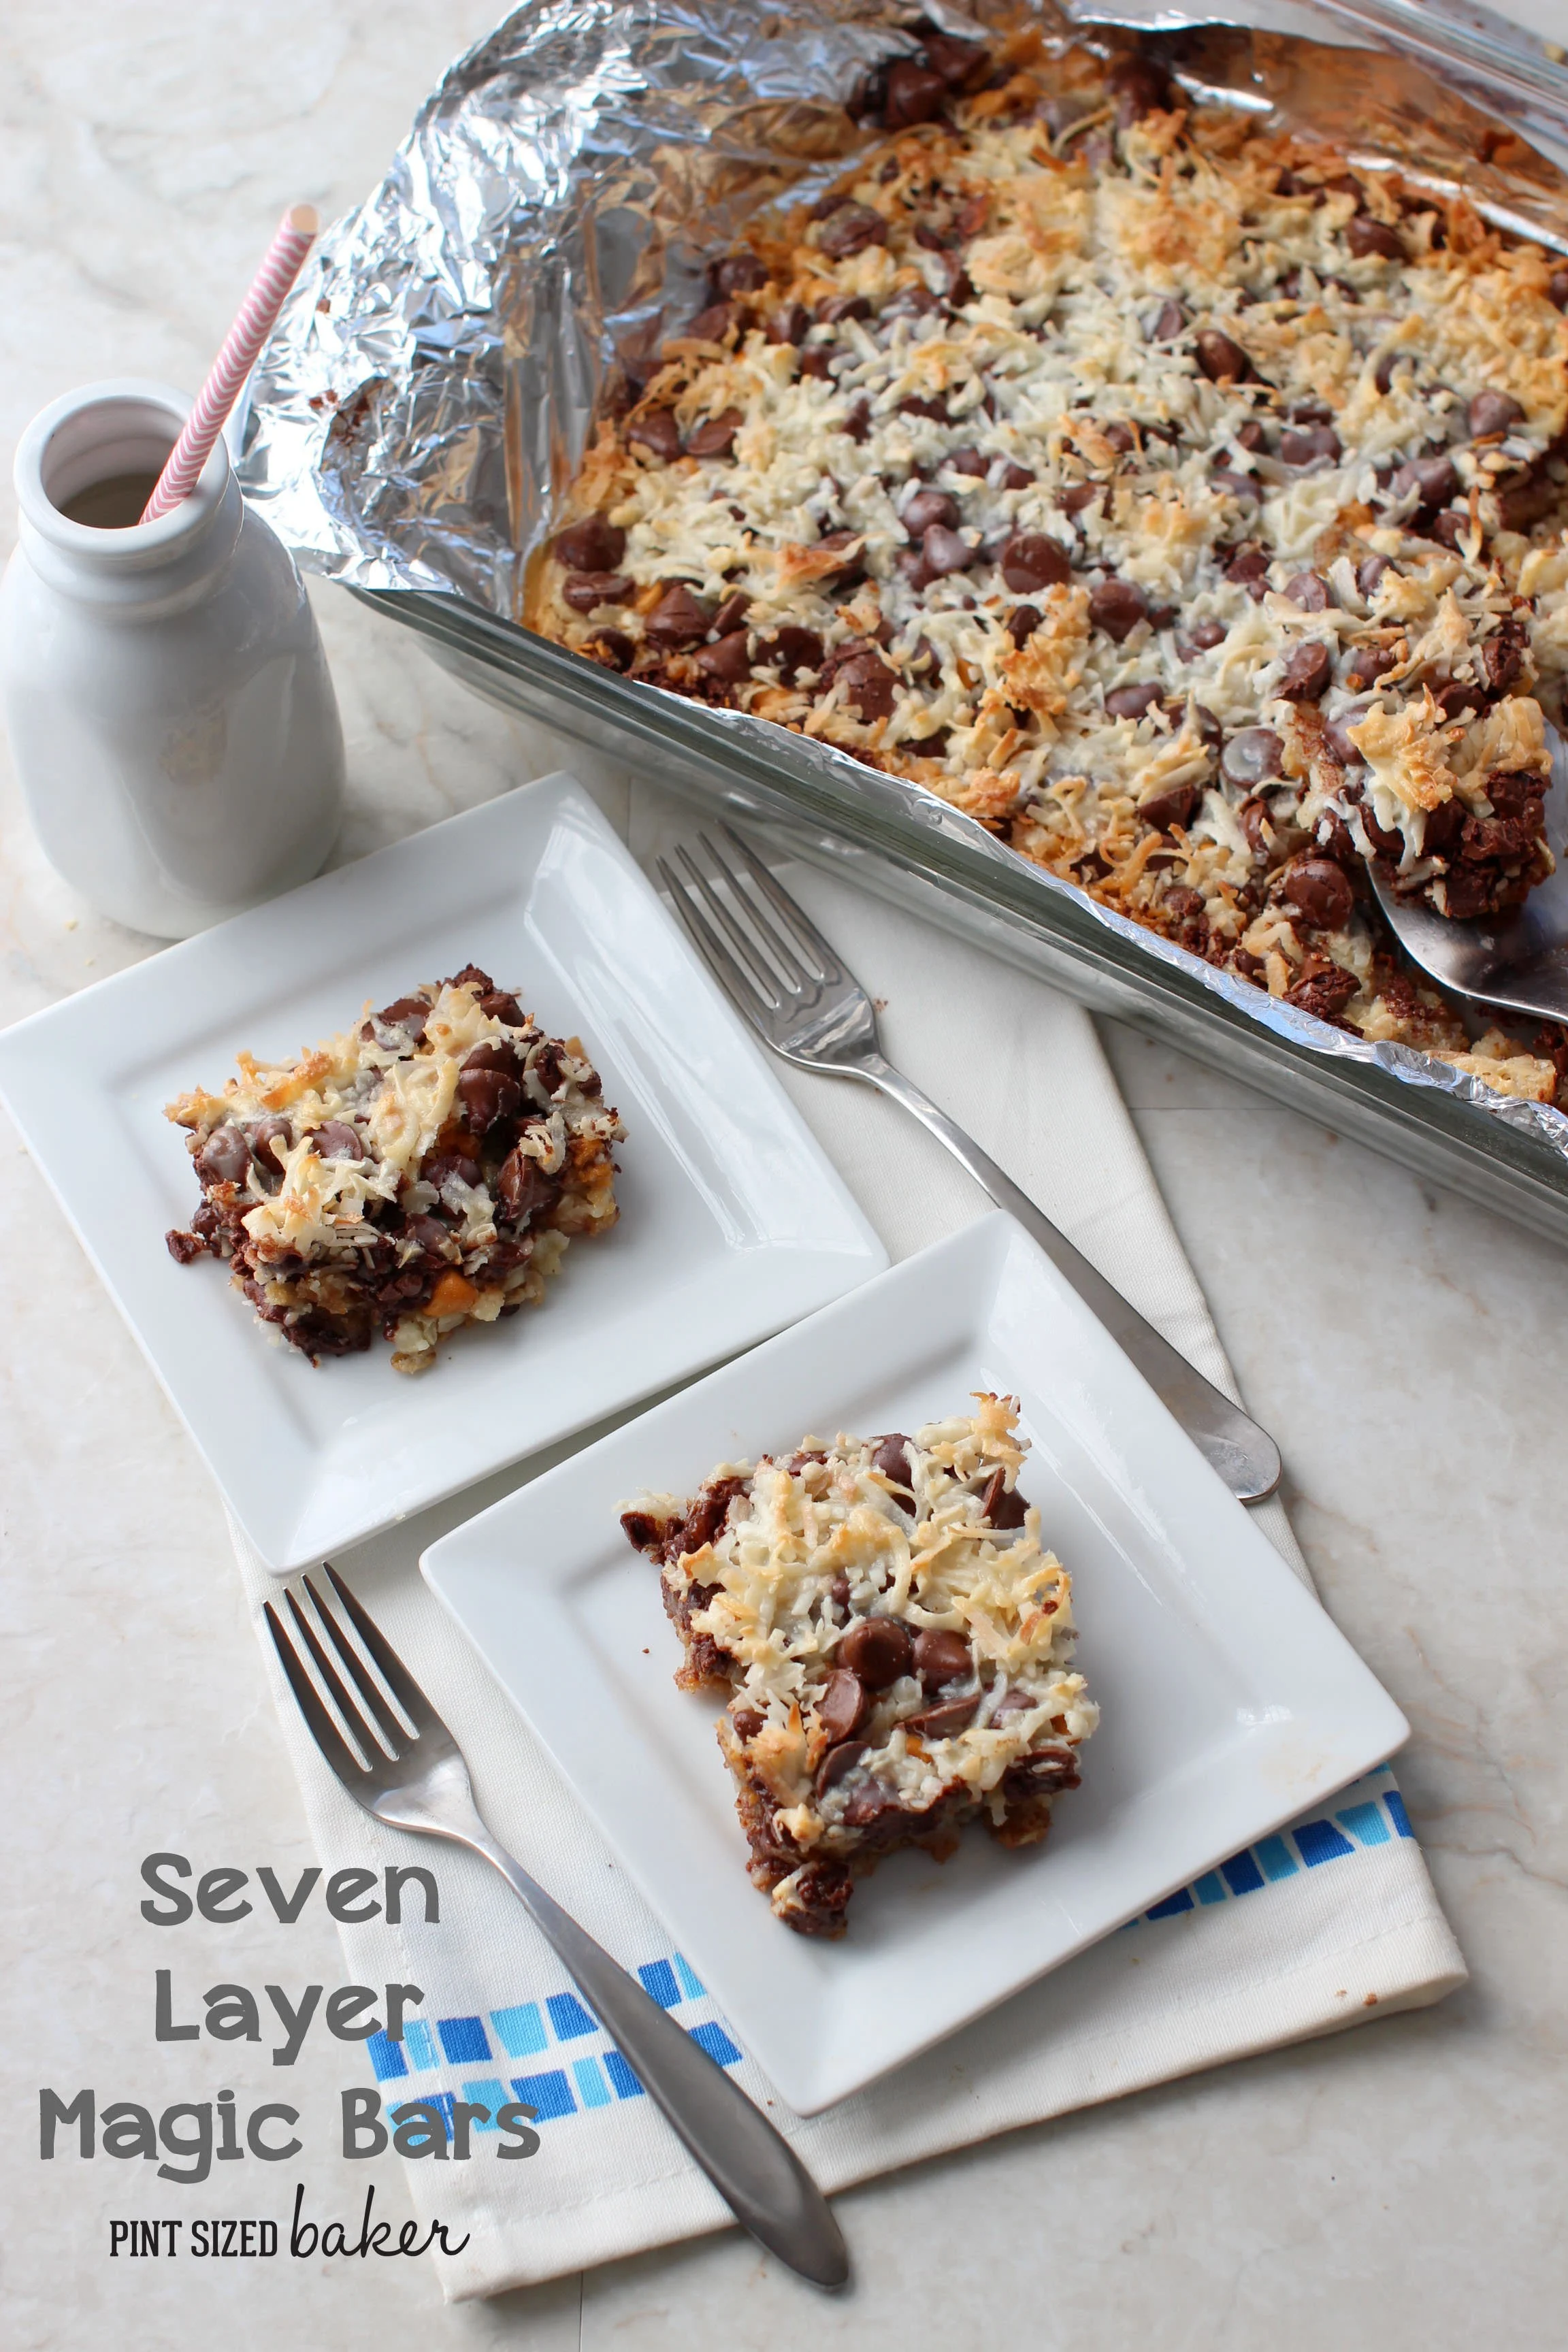 Image linked to my Seven Layer Magic Bars Recipe